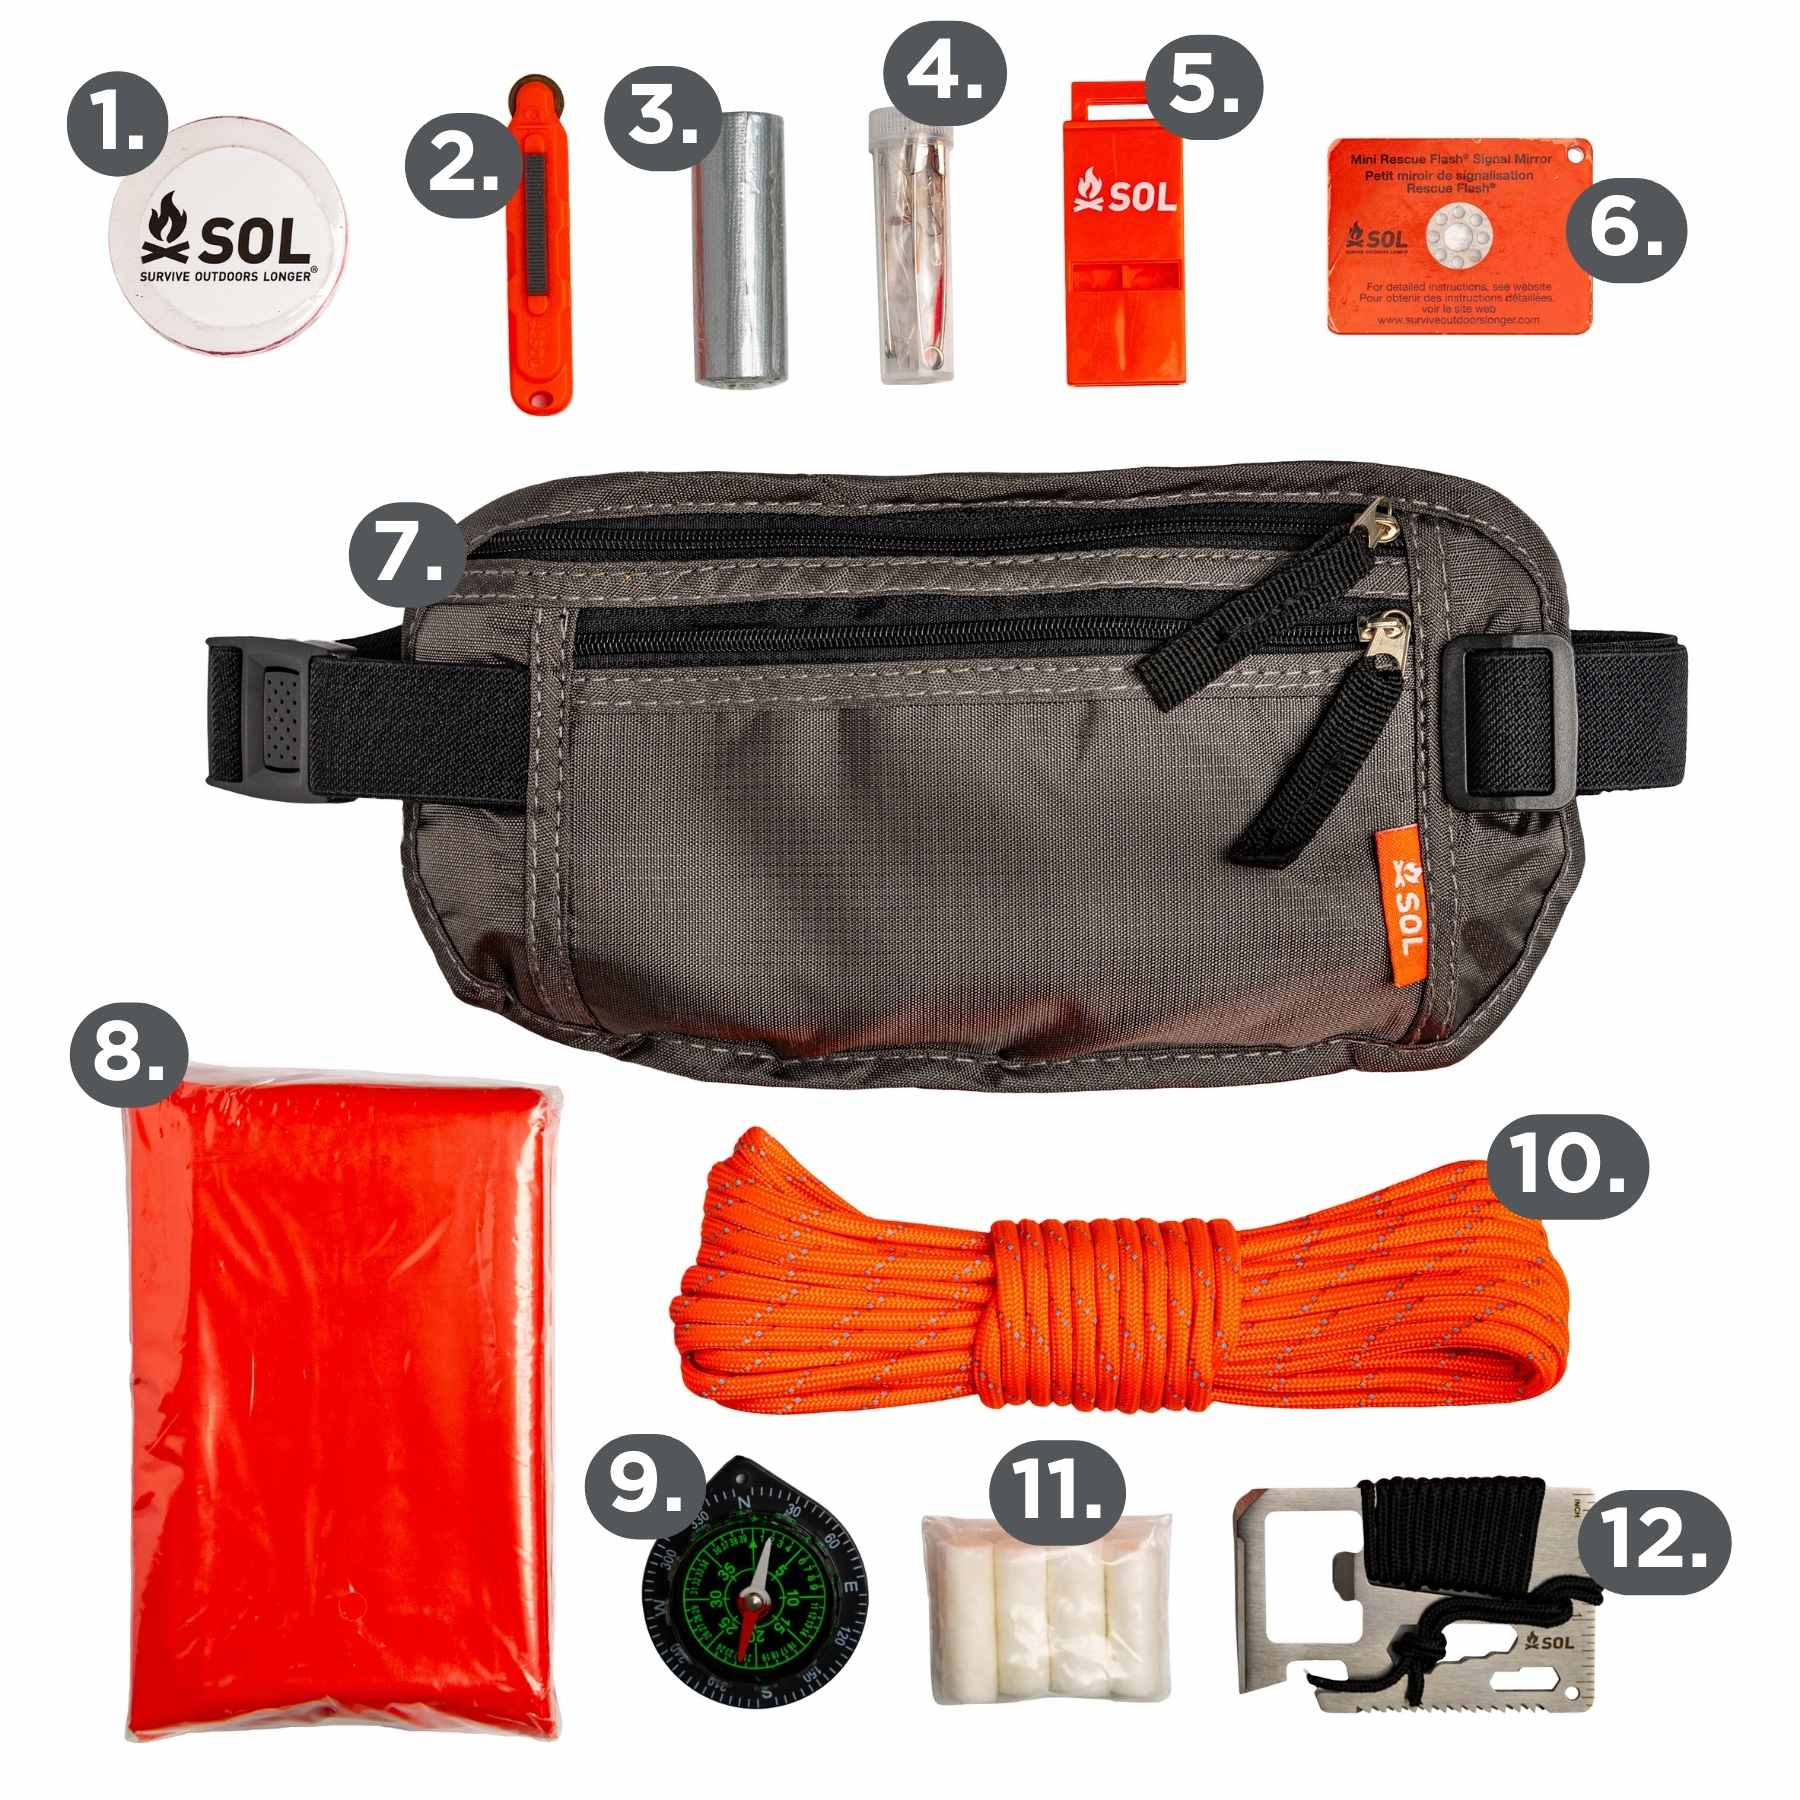 Survival Tools - Best Hiking Gear Essentials For Women Top Survival Kit